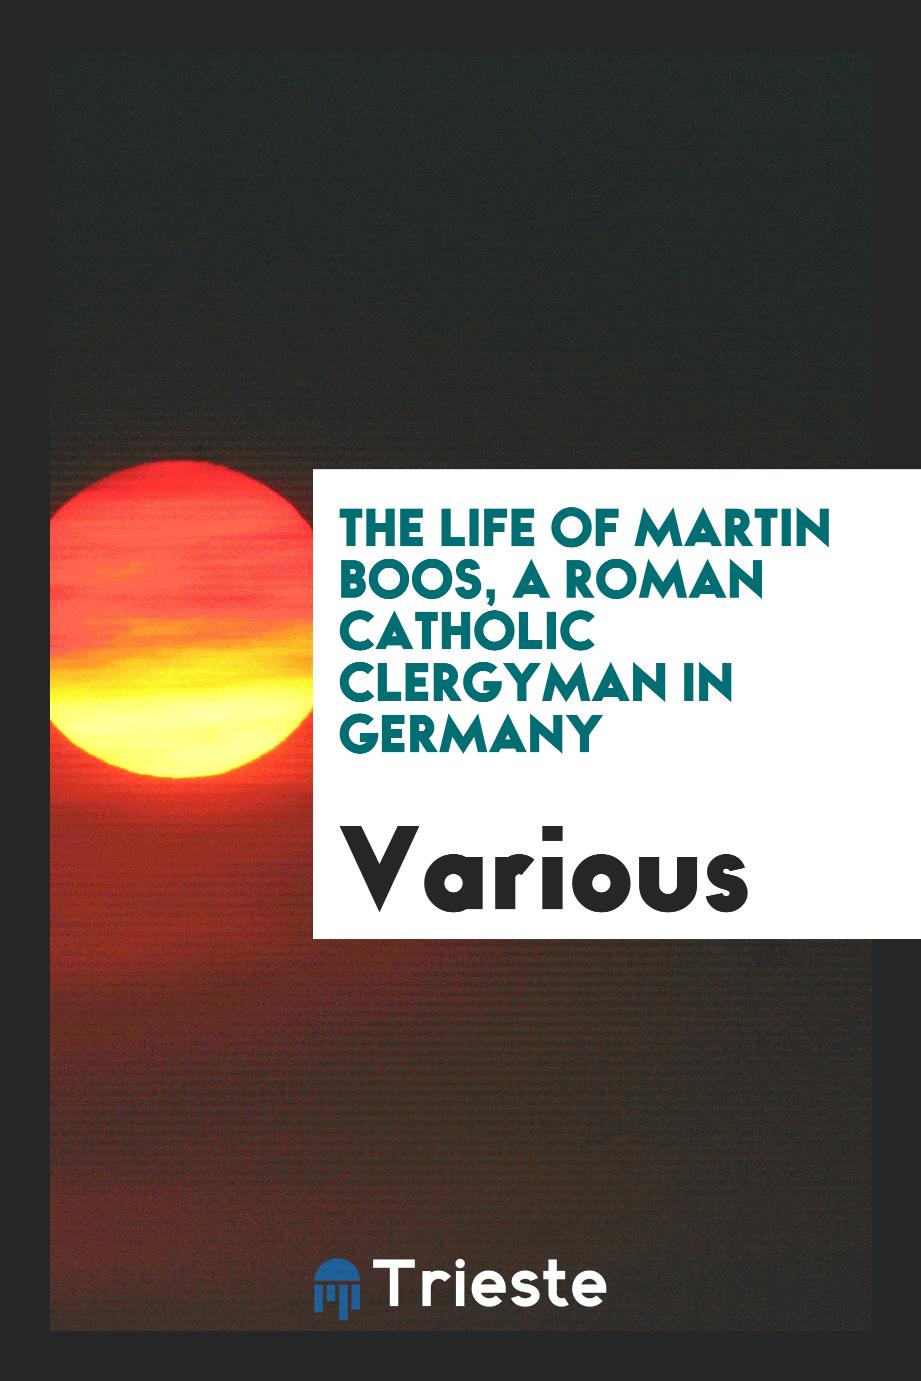 The life of Martin Boos, a Roman Catholic clergyman in Germany